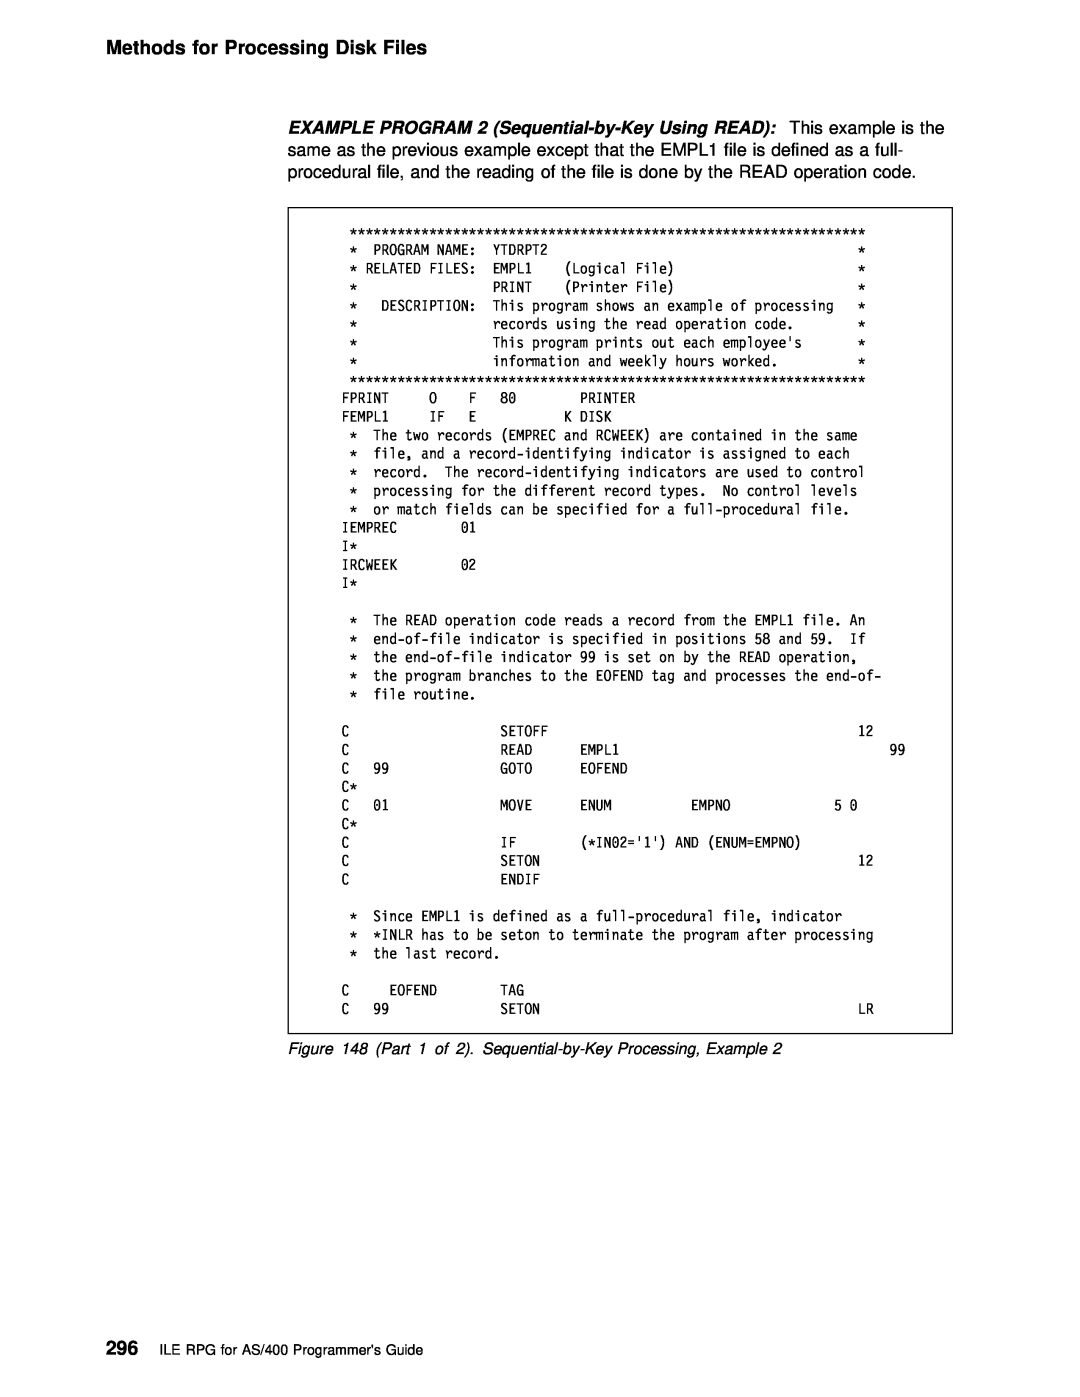 IBM manual Sequential-by-Key Using READ, Methods for Processing Disk Files, ILE RPG for AS/400 Programmers Guide 